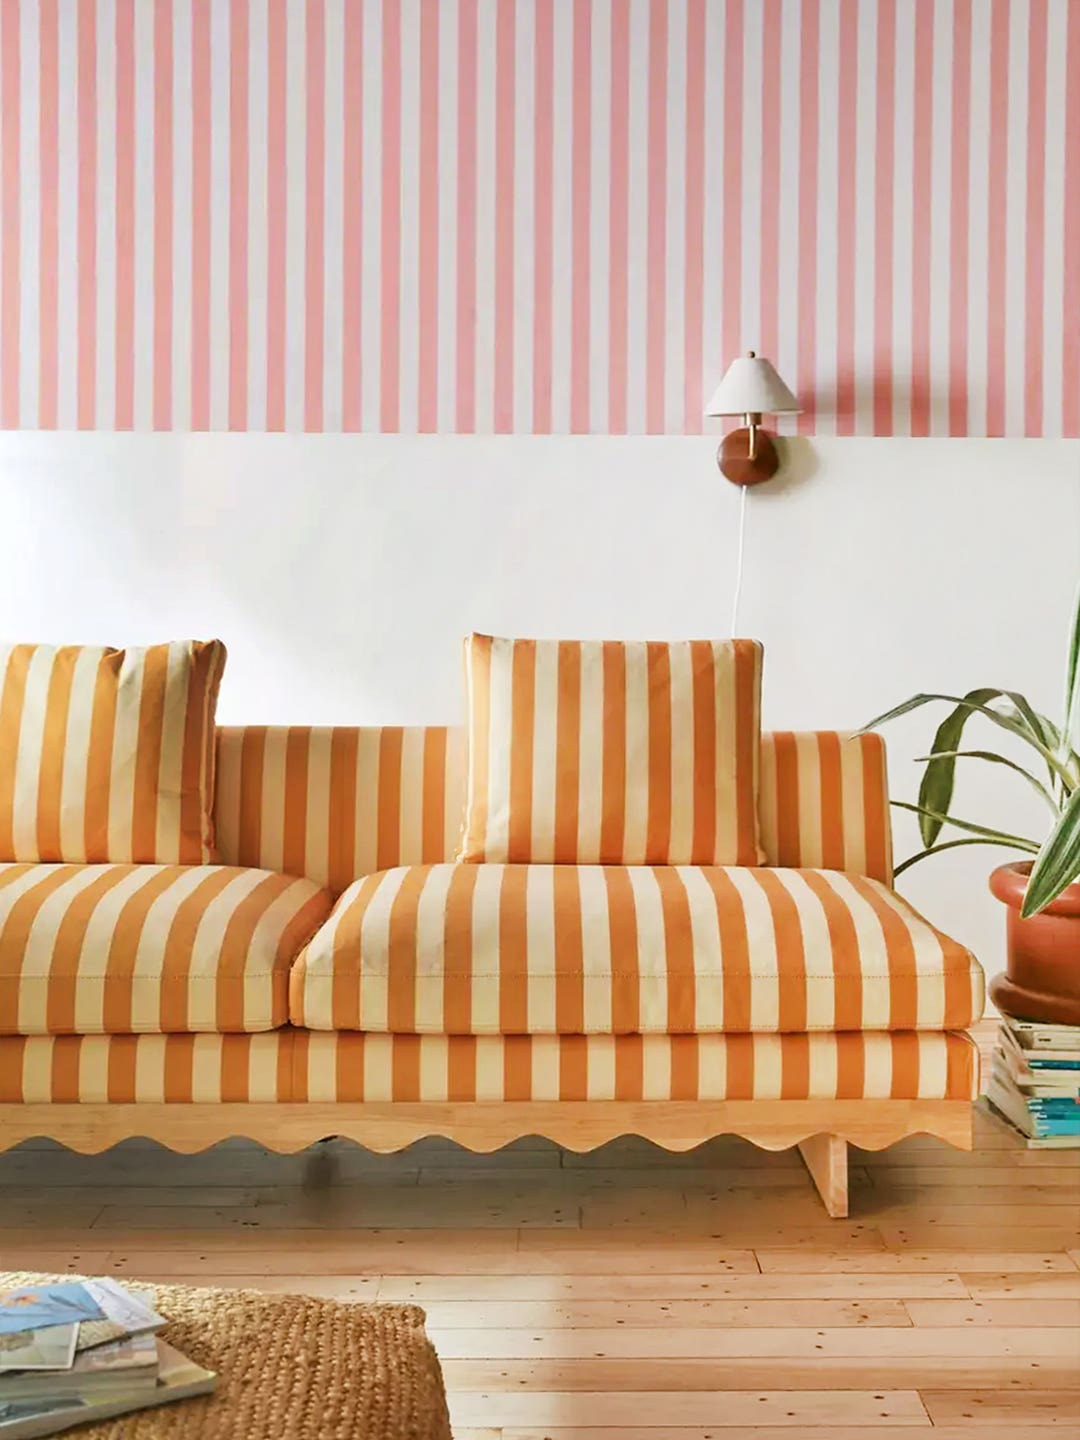 Stripes and Squiggles Collide in This New Urban Outfitters Furniture Drop